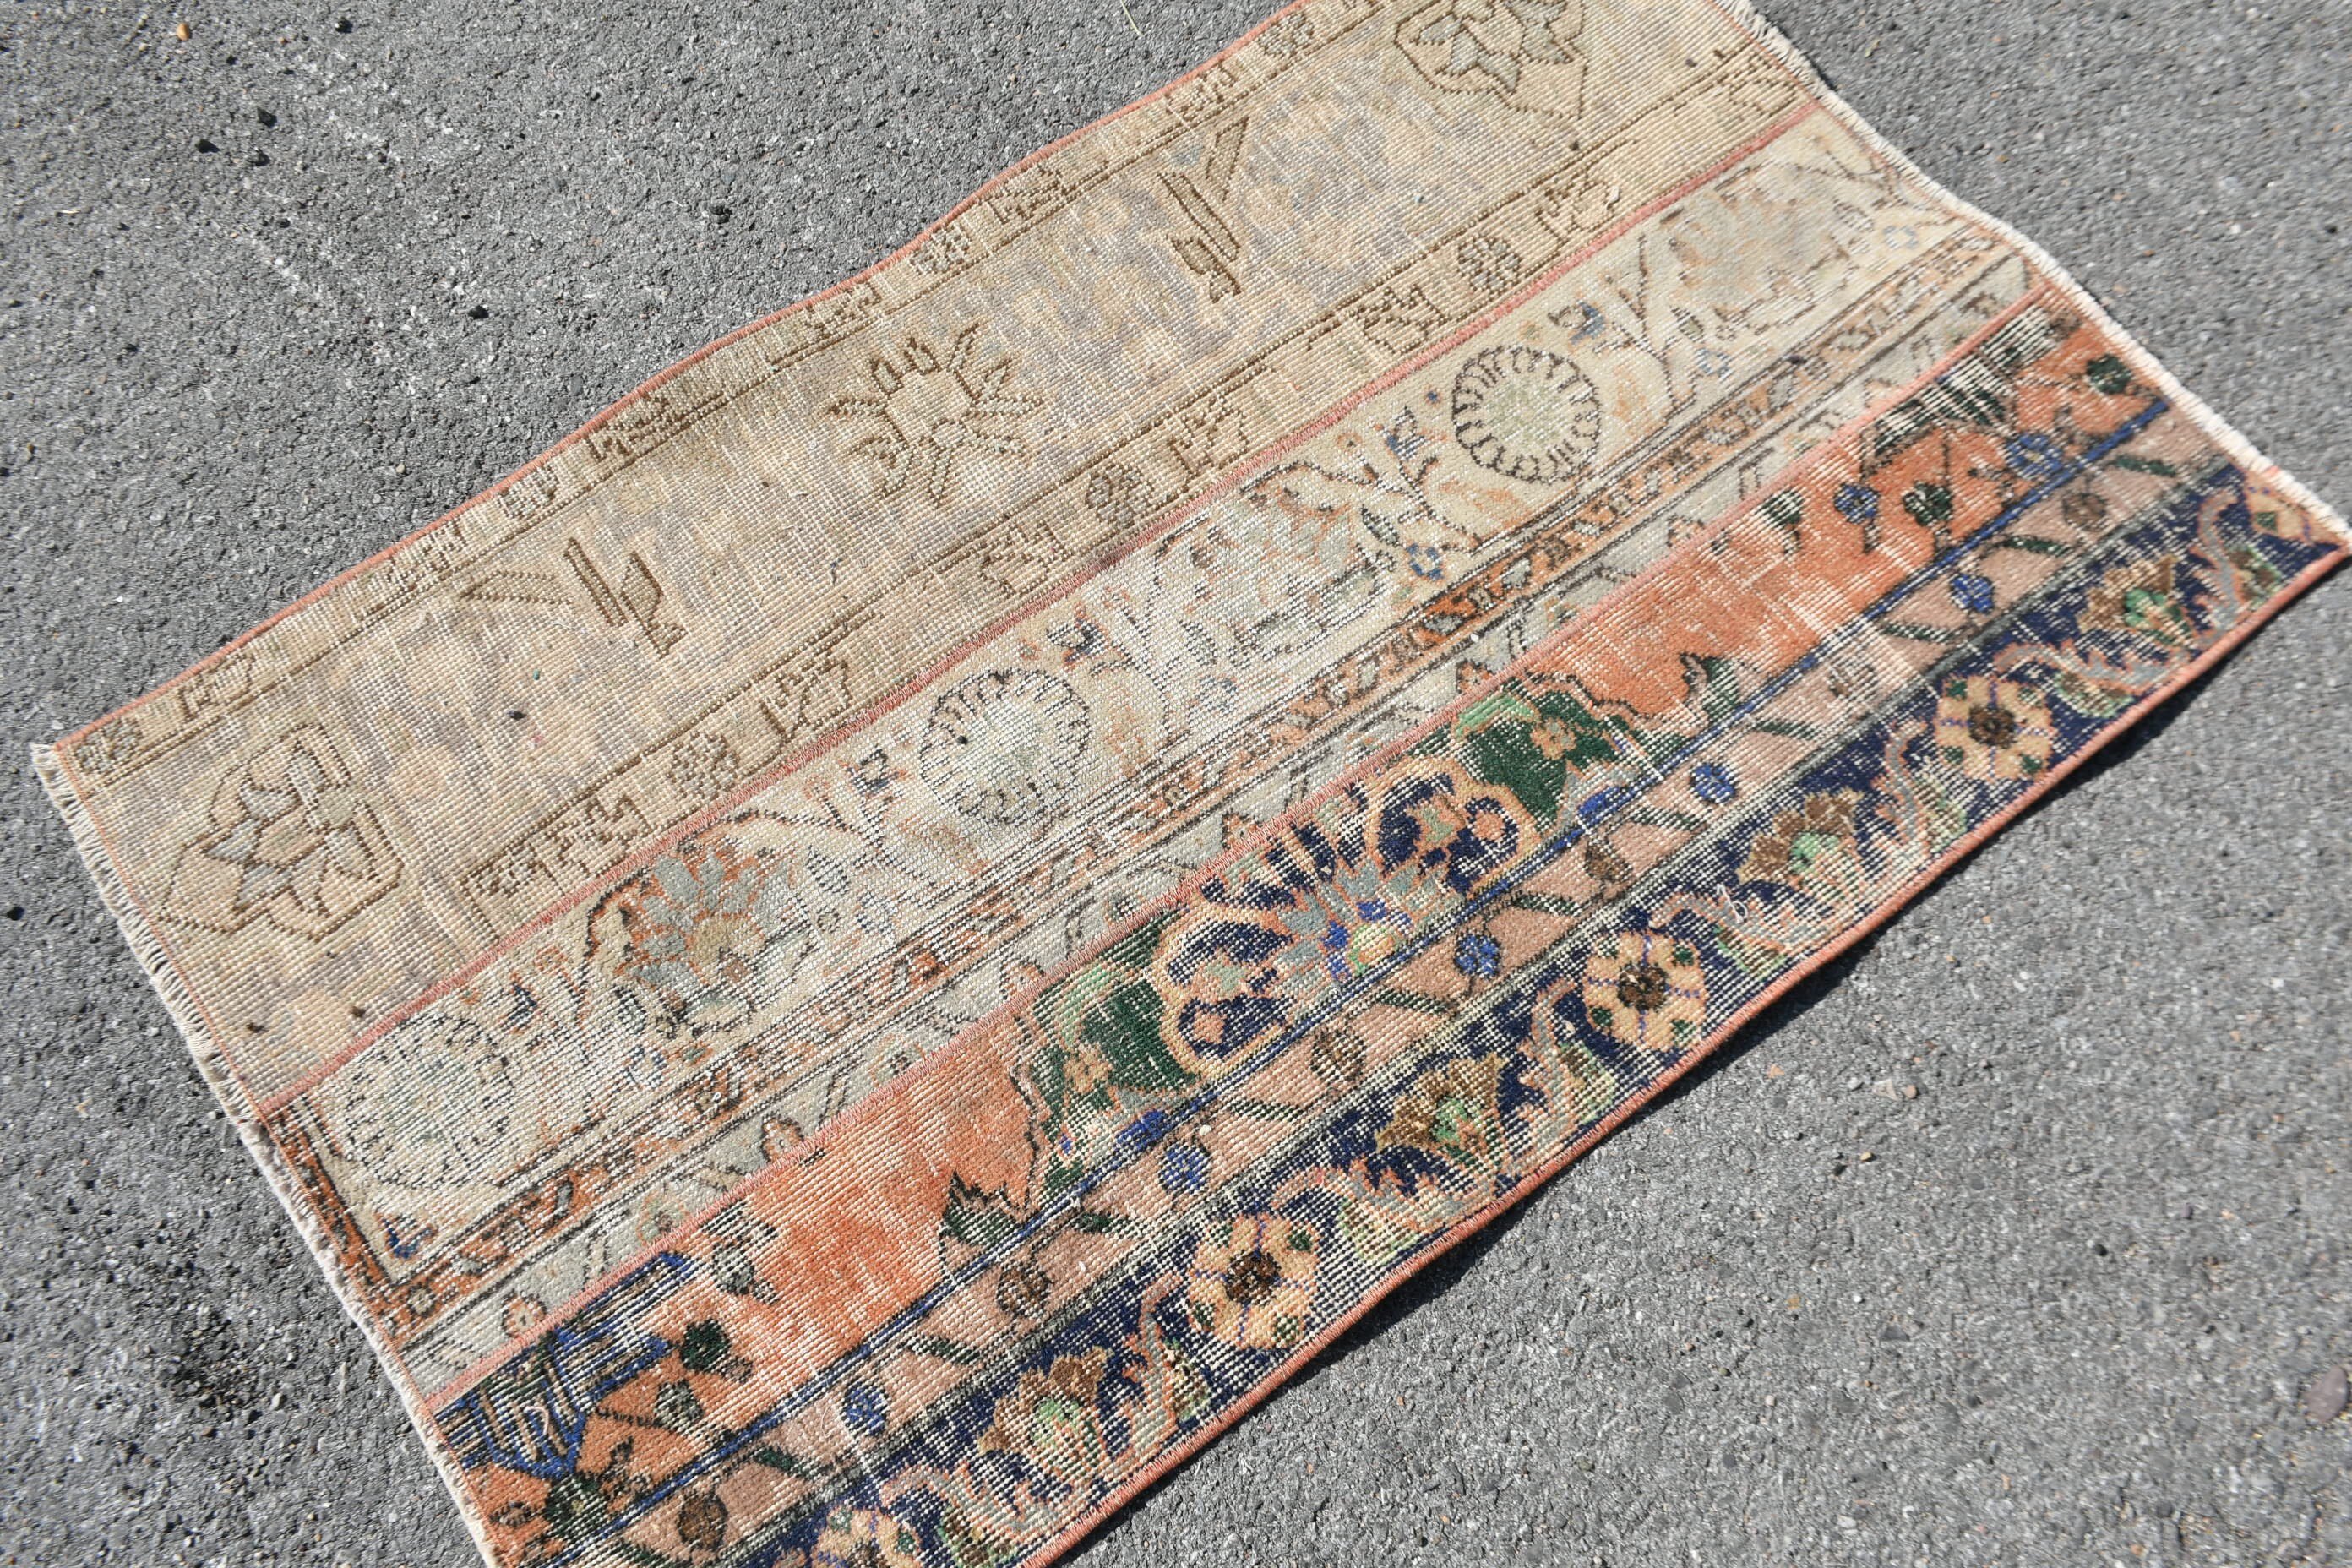 2.5x4 ft Small Rugs, Old Rug, Car Mat Rug, Kitchen Rugs, Turkish Rug, Vintage Rug, Rugs for Nursery, Anatolian Rugs, Orange Home Decor Rugs